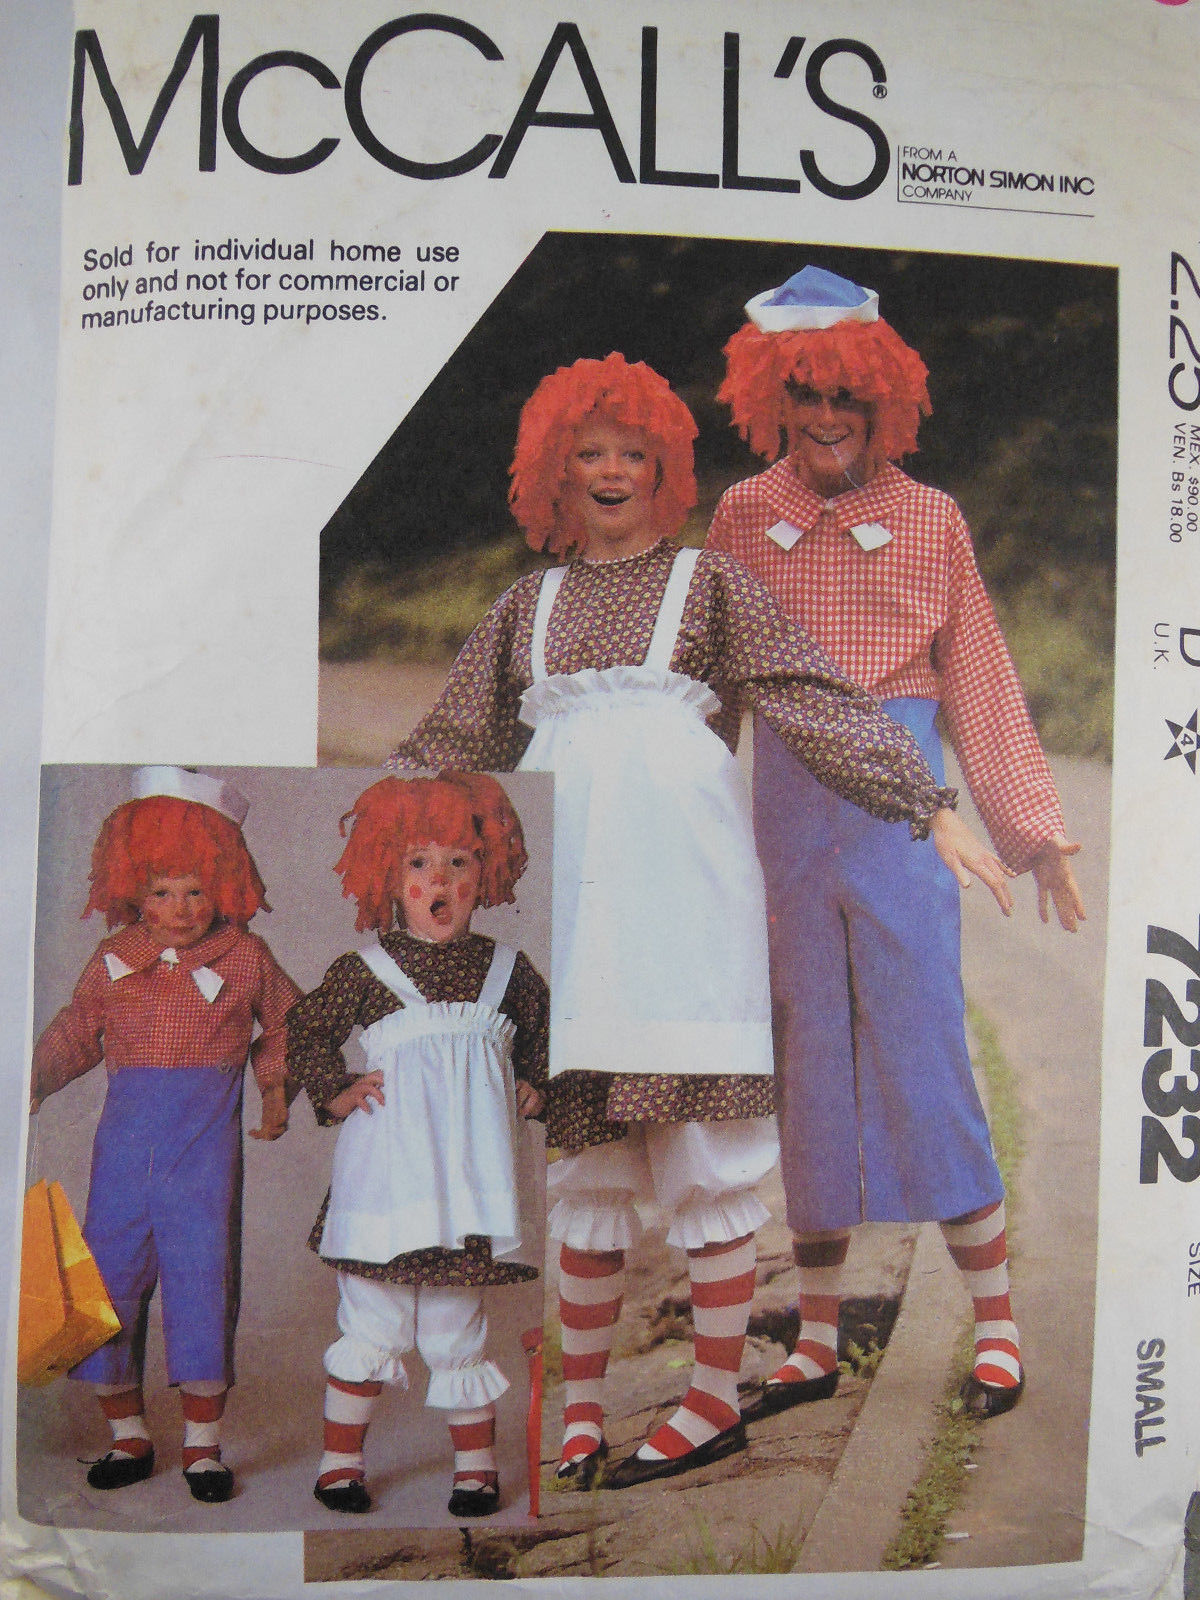 McCall's Pattern 7232 Raggedy Ann & Andy Costumes Misses Men Size Small Complete - $4.94